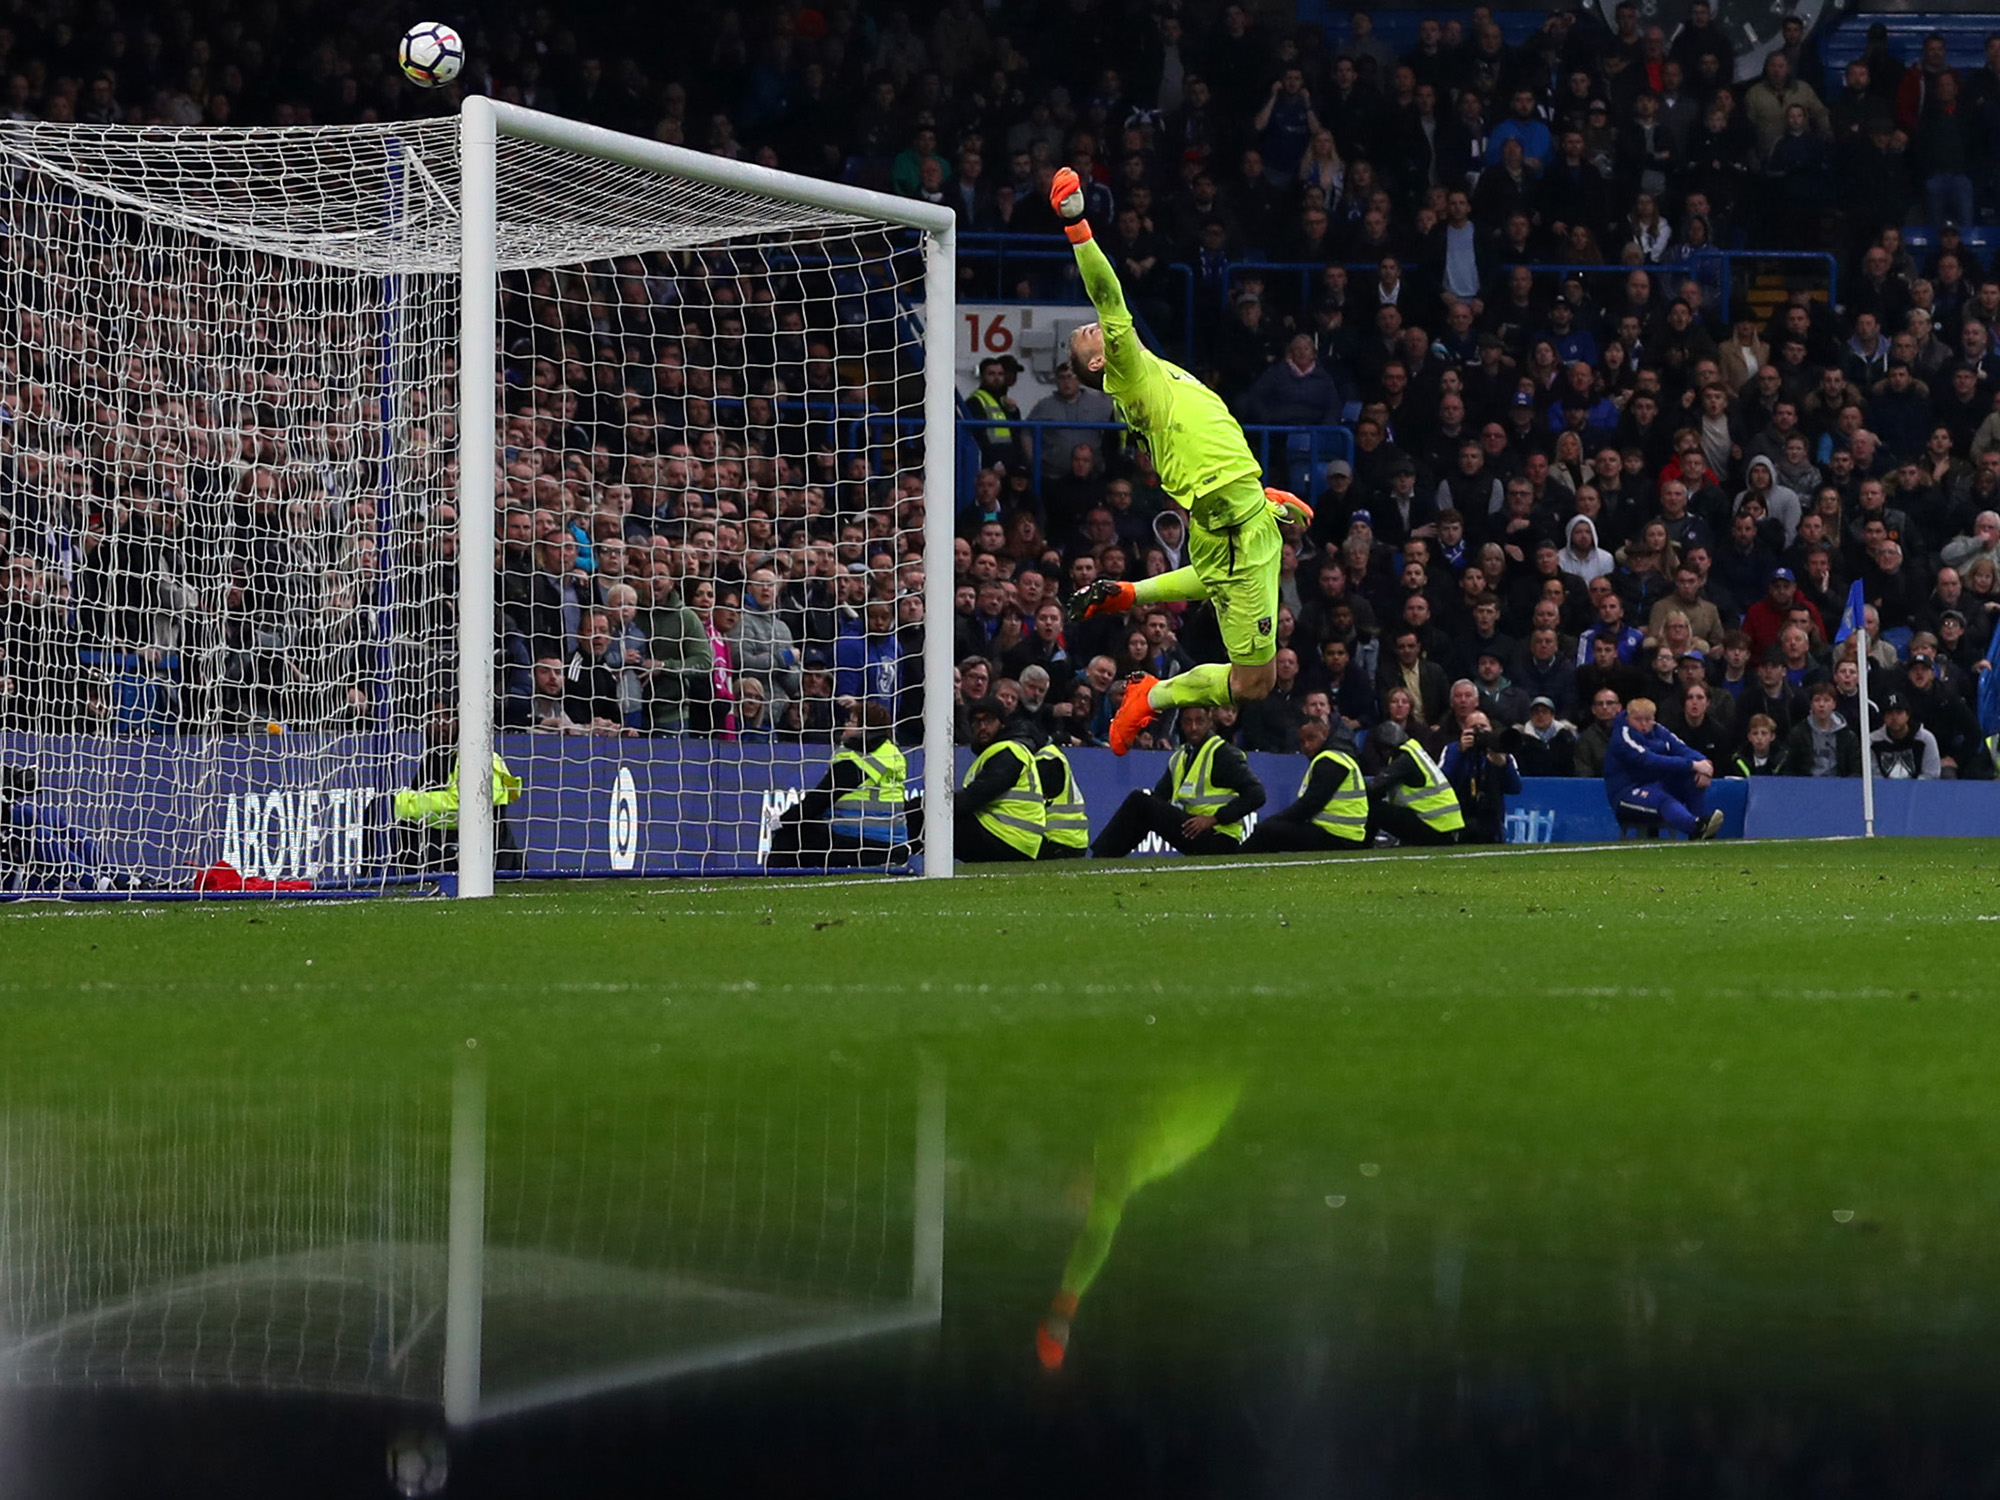 Joe Hart of West Ham United makes a save during the Premier League match between Chelsea and West Ham United on April 8, in London.